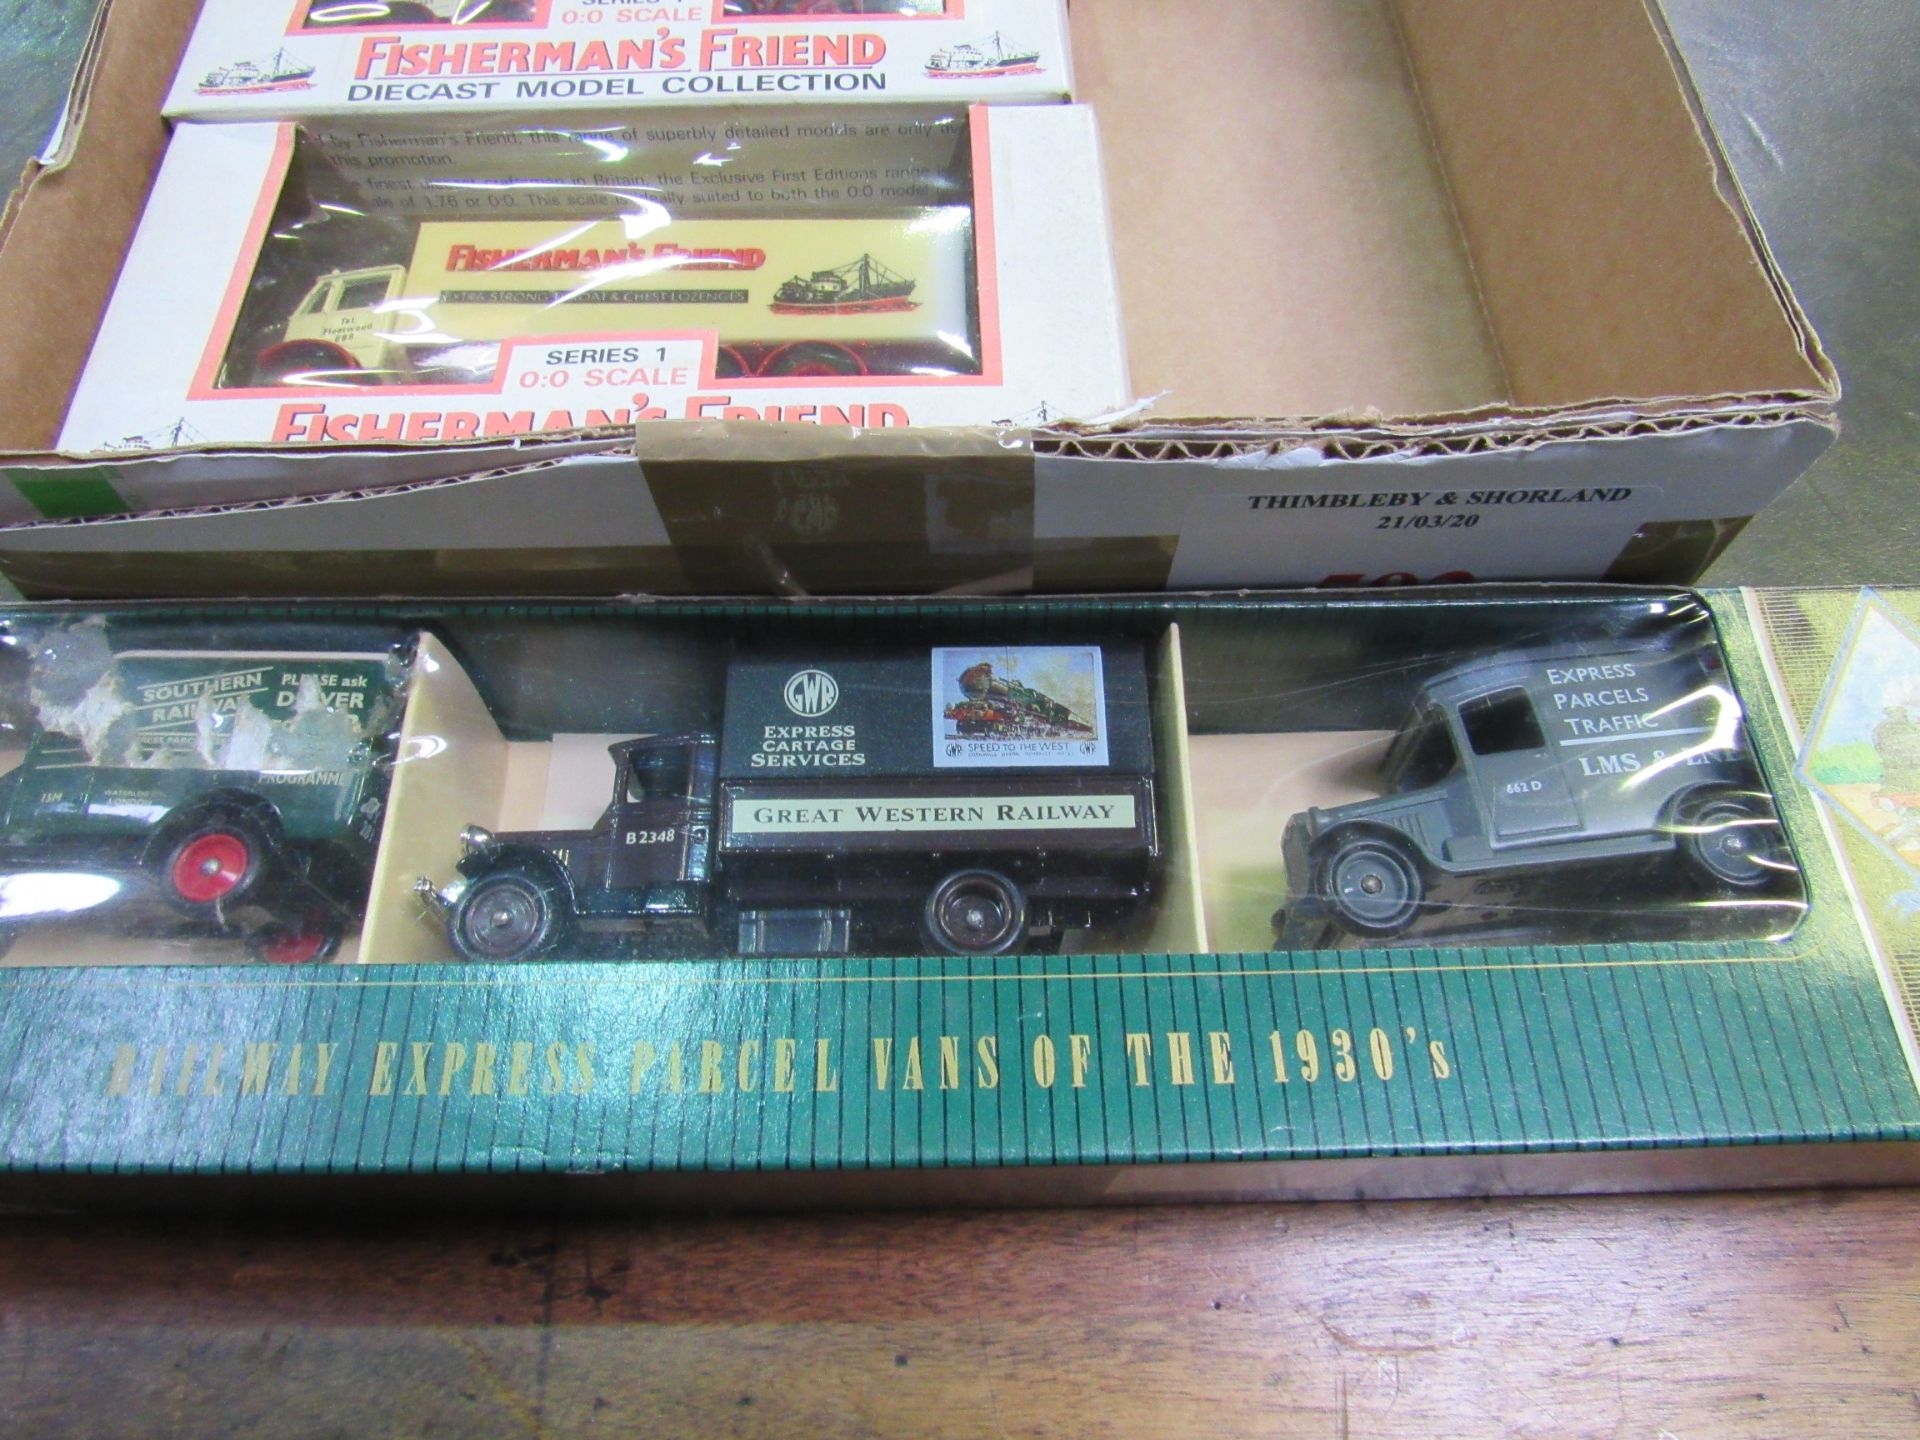 3 Lledo Days Gone Fisherman Friend die-cast vehicles all boxed; 2 boxed Ridgeway Express vehicles. - Image 2 of 3